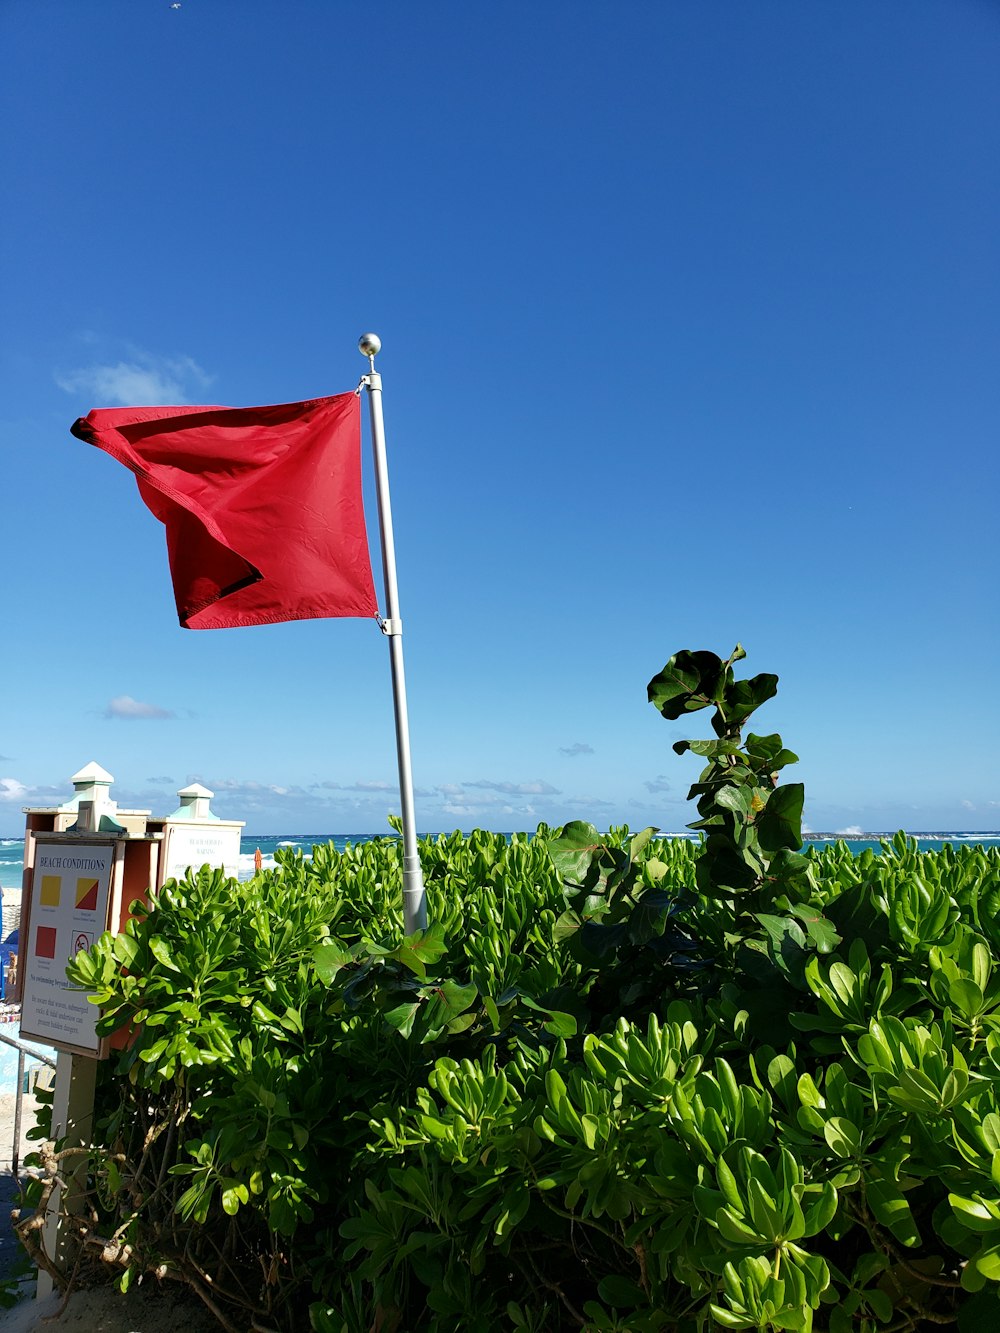 red flag on white pole